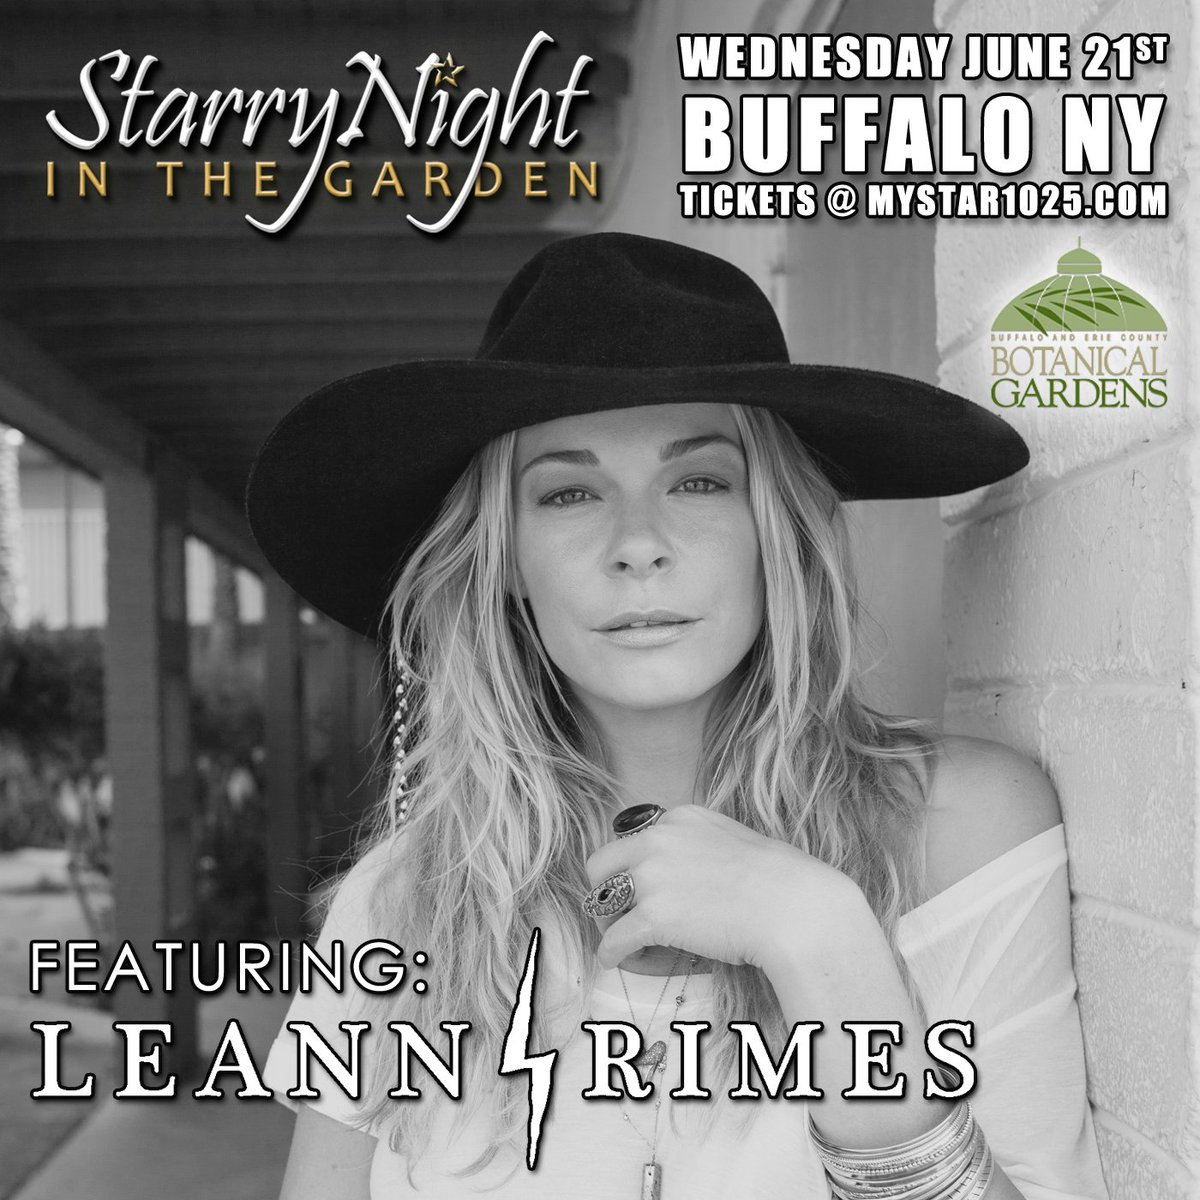 Very excited to be playing @mystar1025 Starry Night in the Garden! Get your tickets here: https://t.co/EBgHIYYwsO https://t.co/25mHuZuXjz